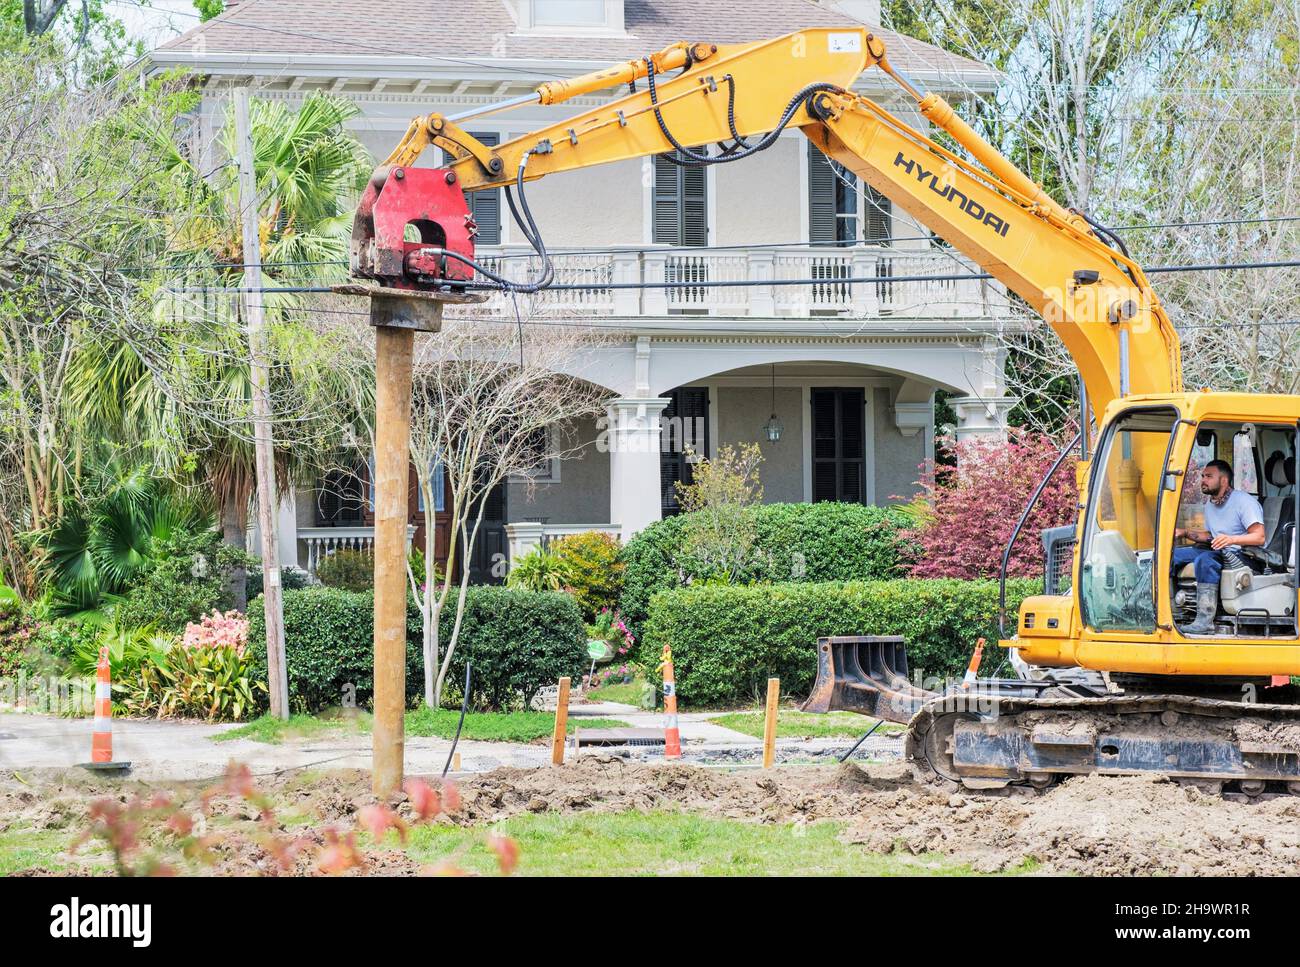 NEW ORLEANS, LA, USA - MARCH 22, 2021: Man operating pile driver for new construction in Uptown neighborhood Stock Photo